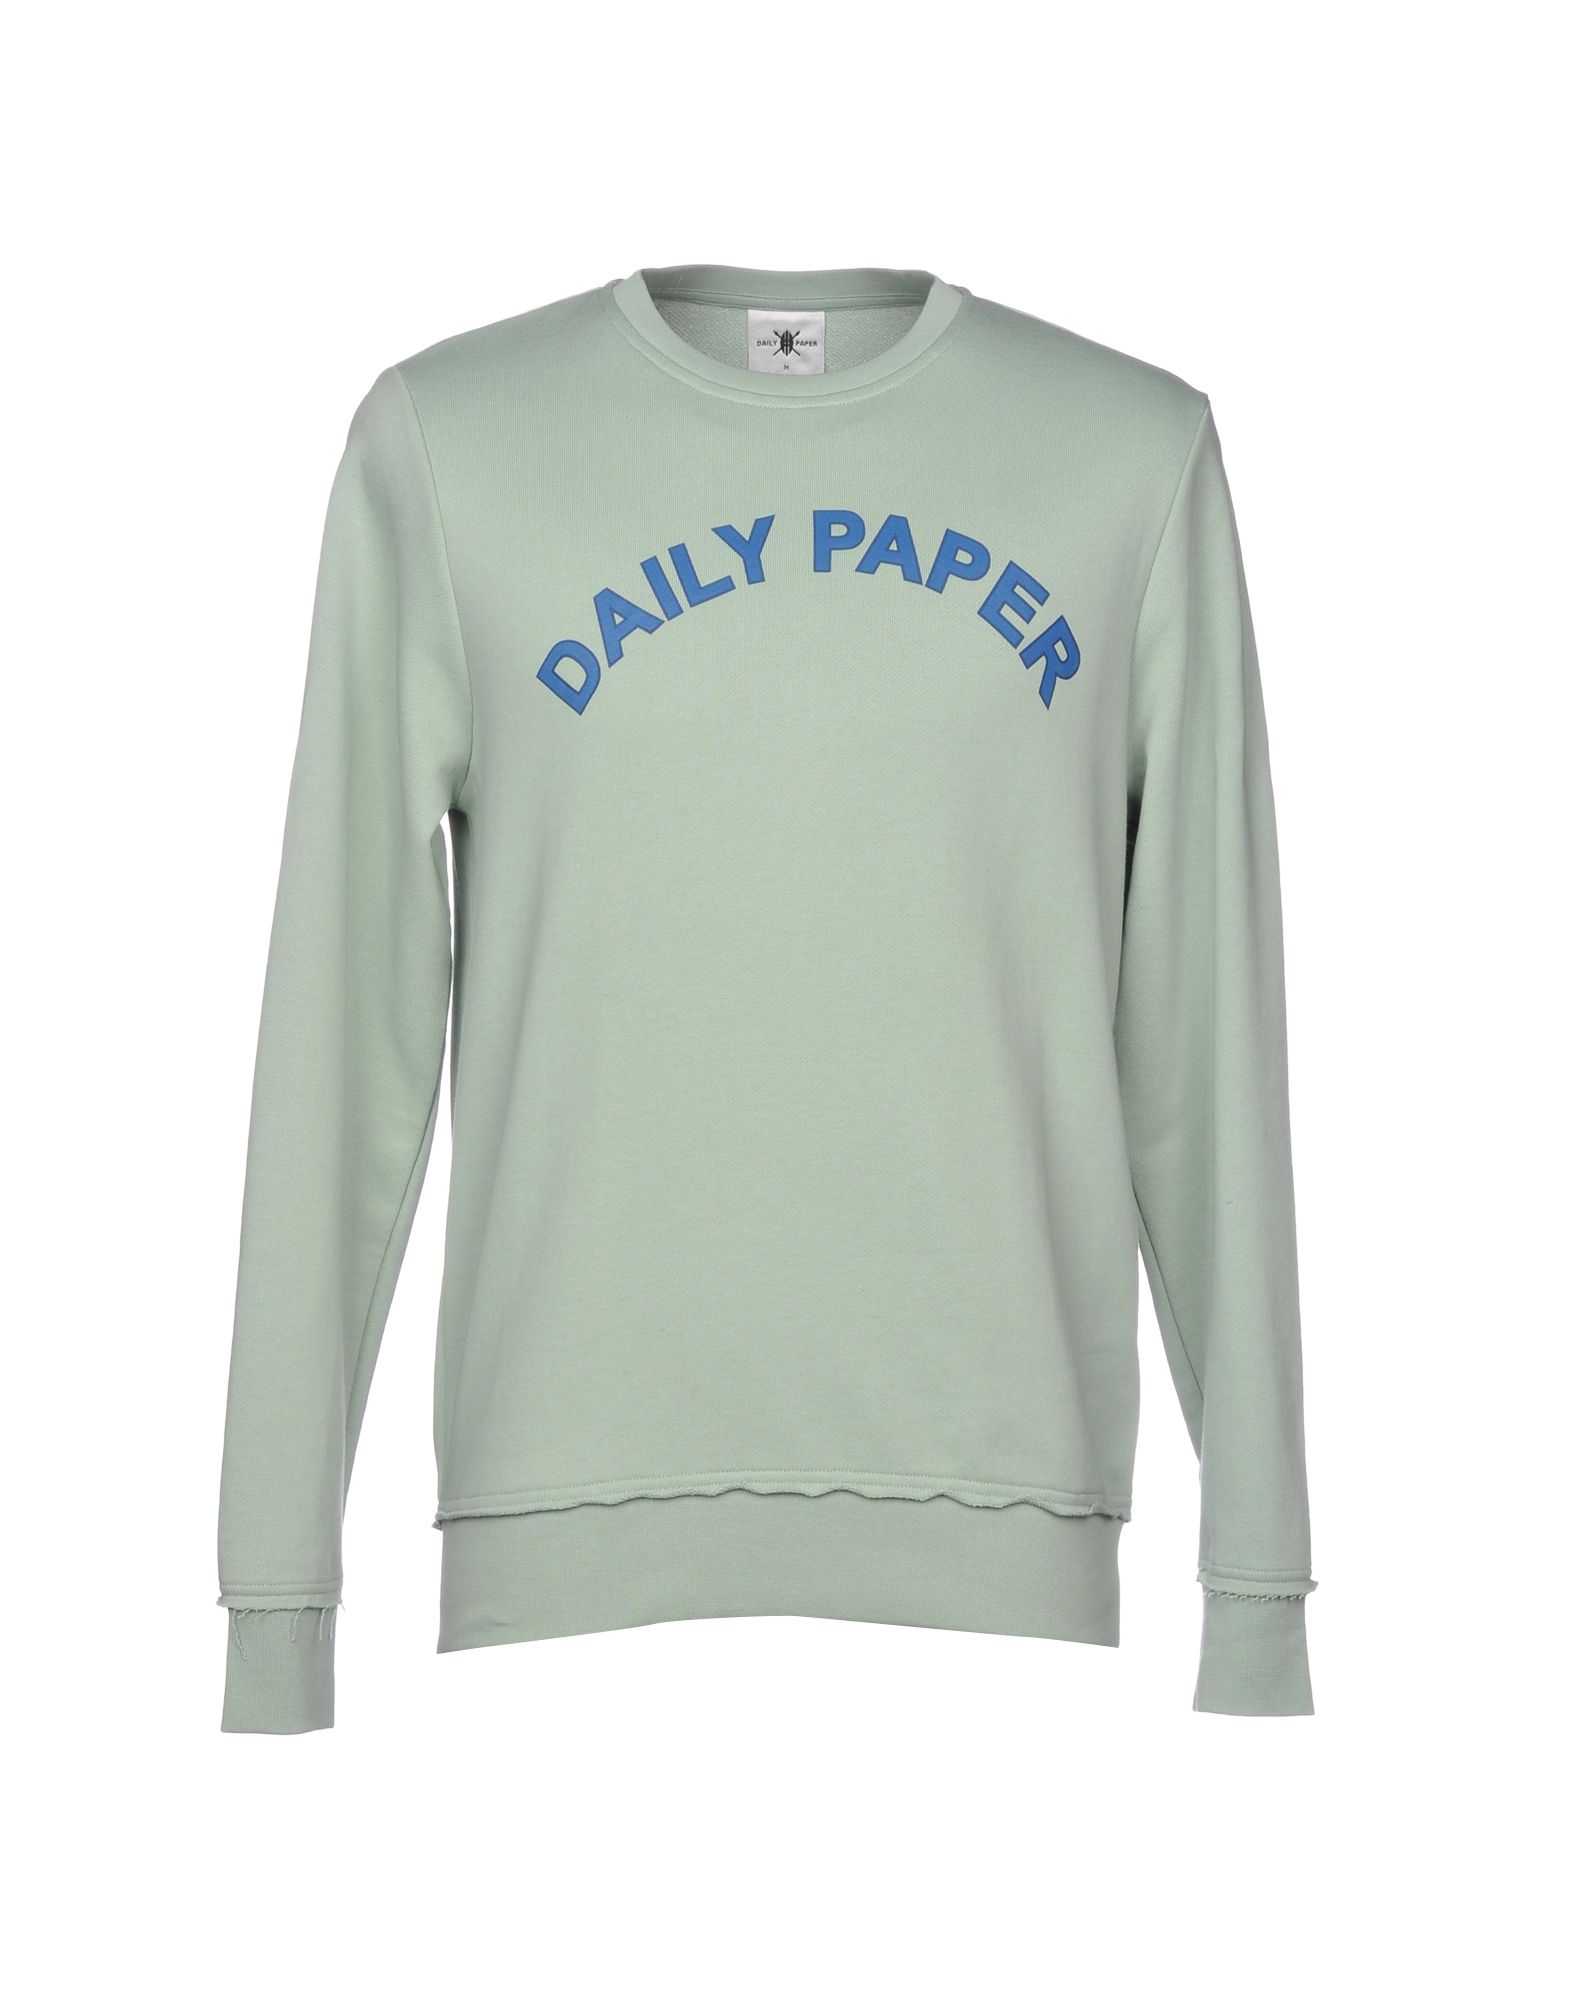 DAILY PAPER SWEATSHIRTS,12195006TO 7